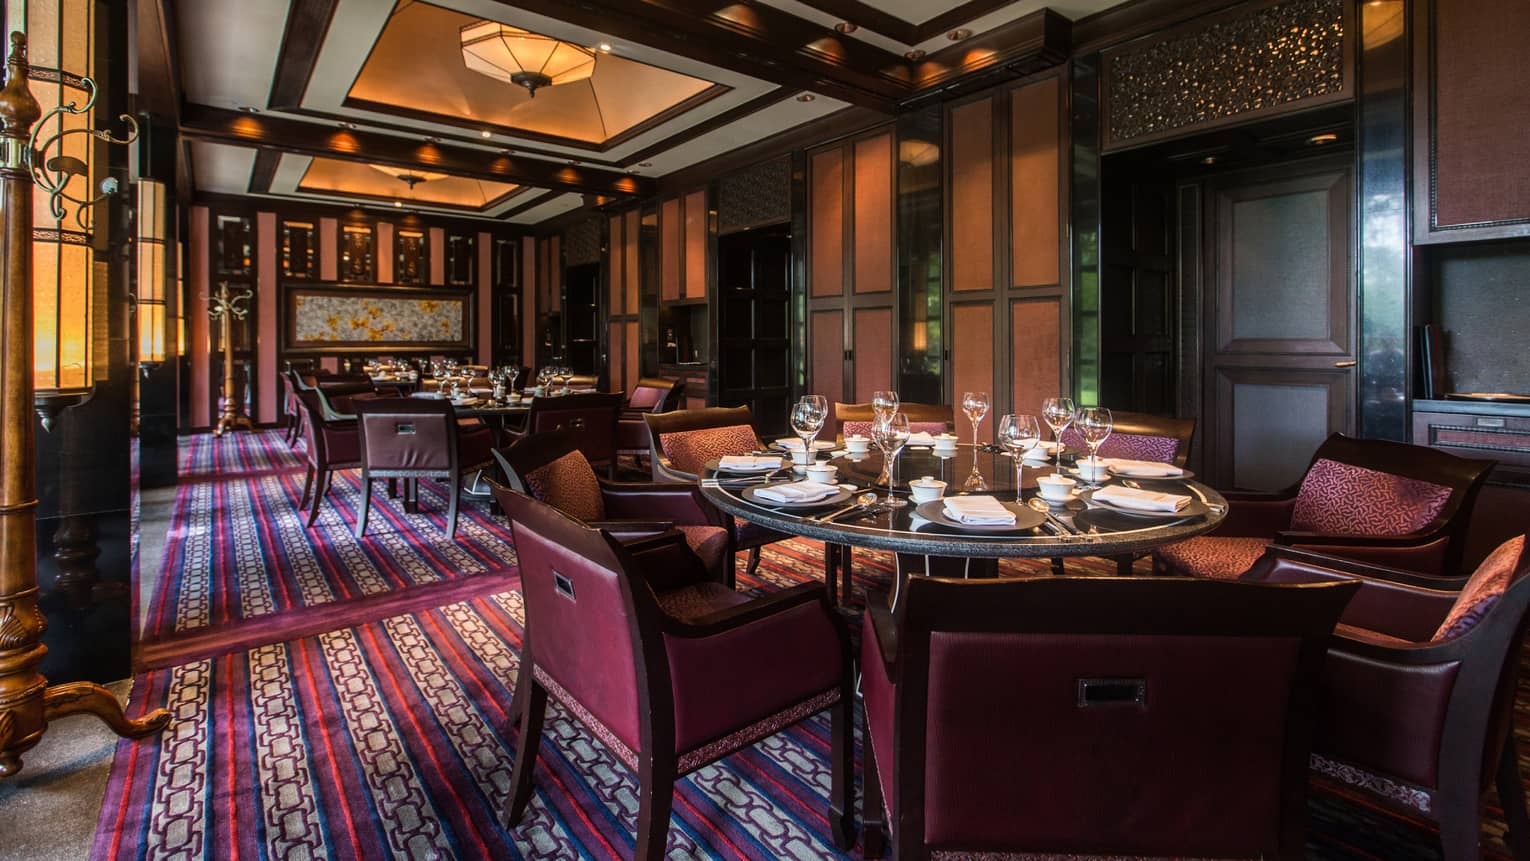 Dining tables, chairs, red-and-blue patterned rug in Jin Sha dining room